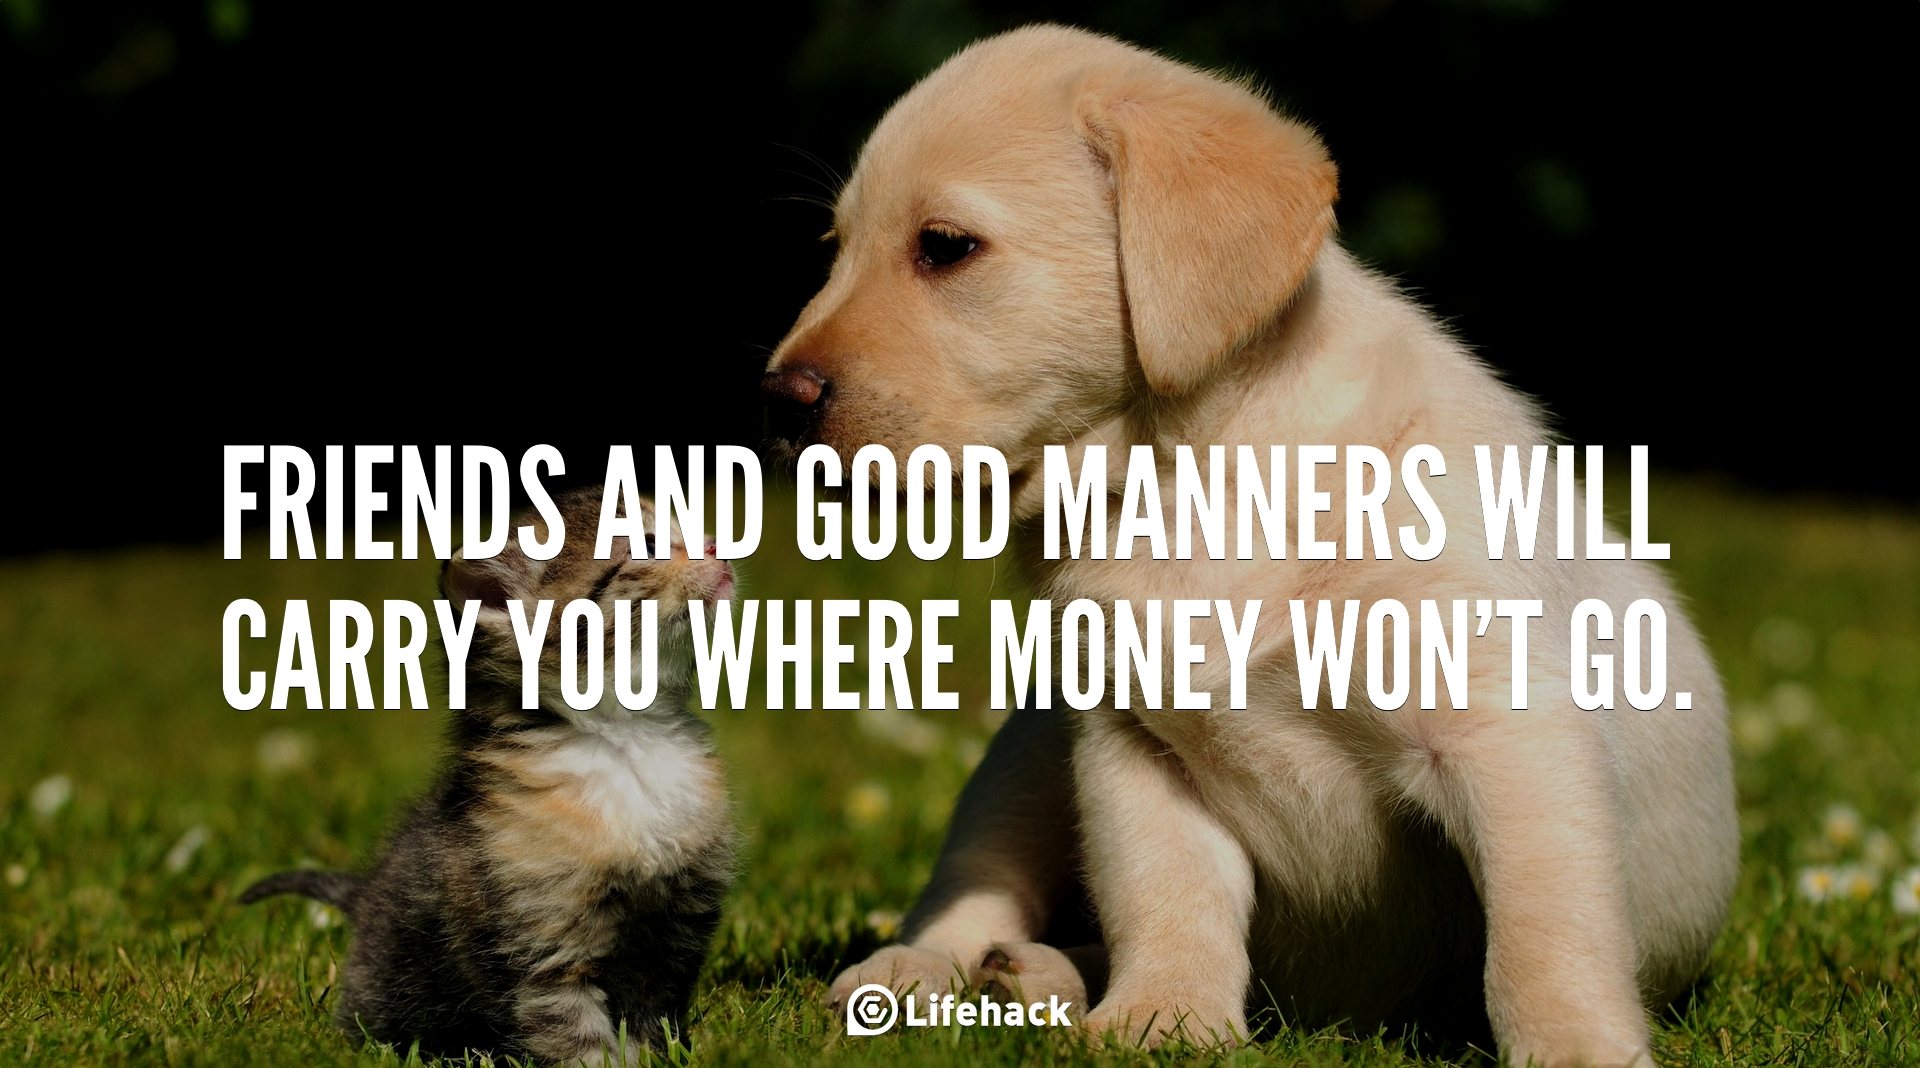 30sec Tip: Real Friends and Good Manners